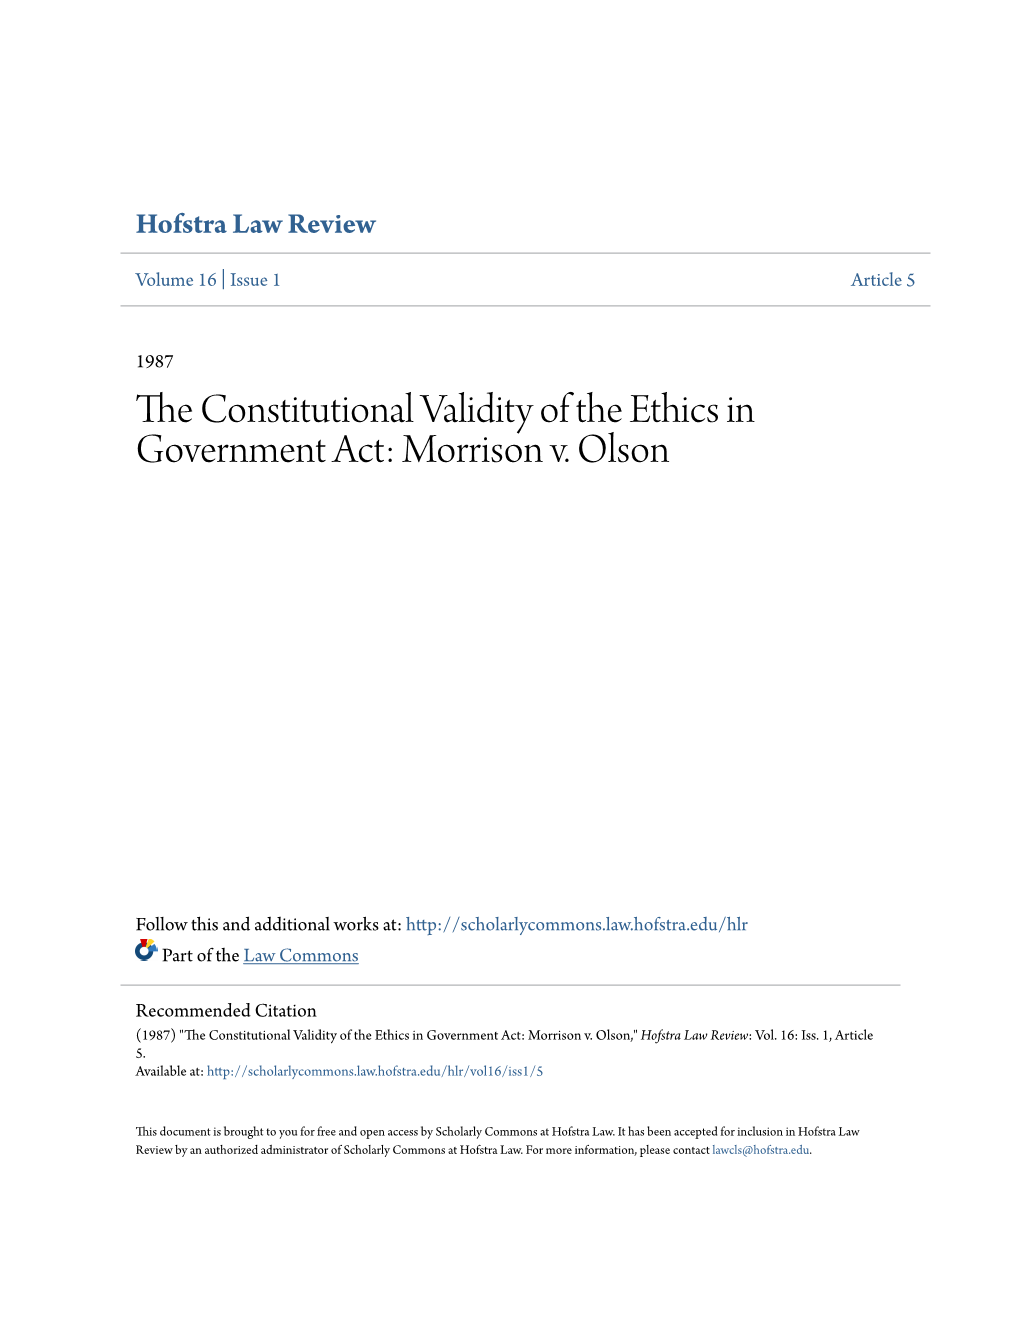 The Constitutional Validity of the Ethics in Government Act: Morrison V